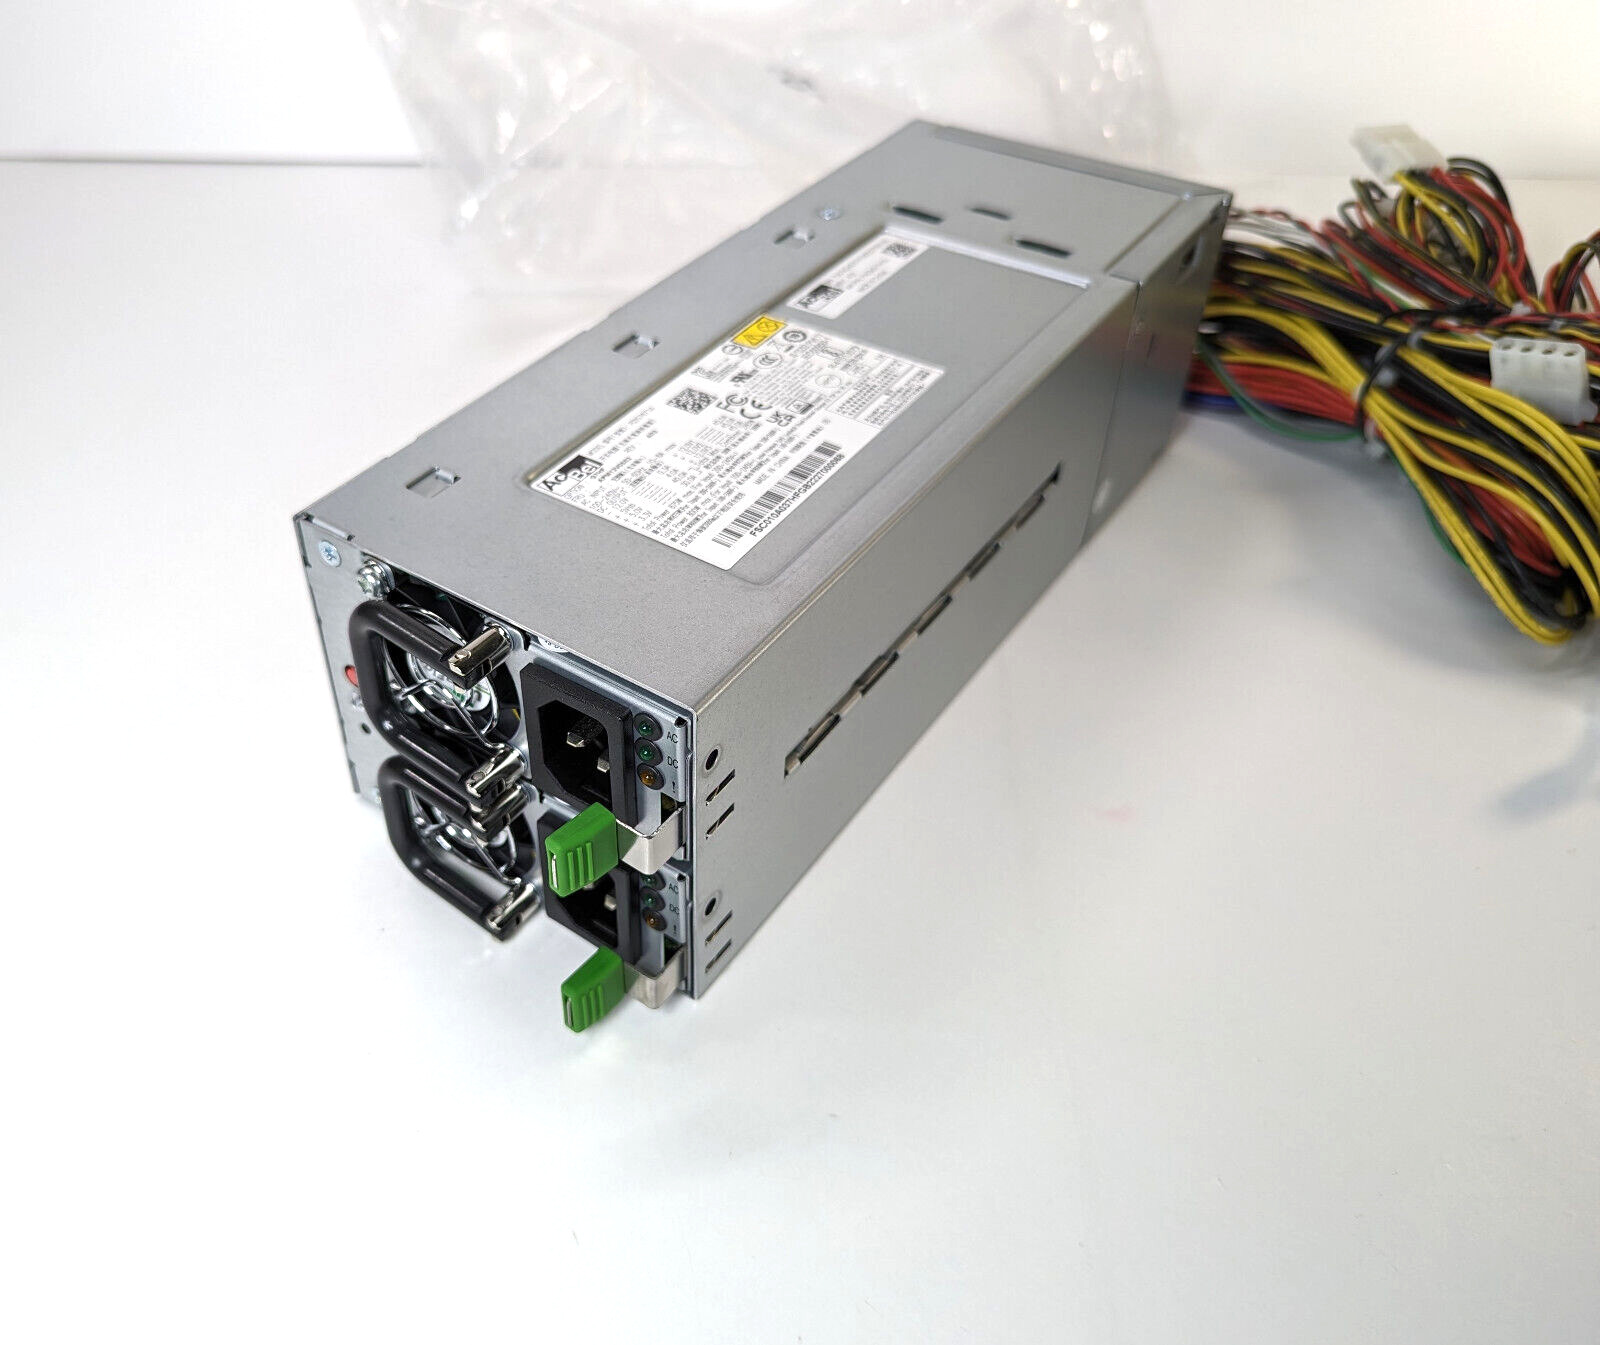 AcBel Polytech 875W Server Power Supply - R2IS7871A Enclosure + 2x Power Modules